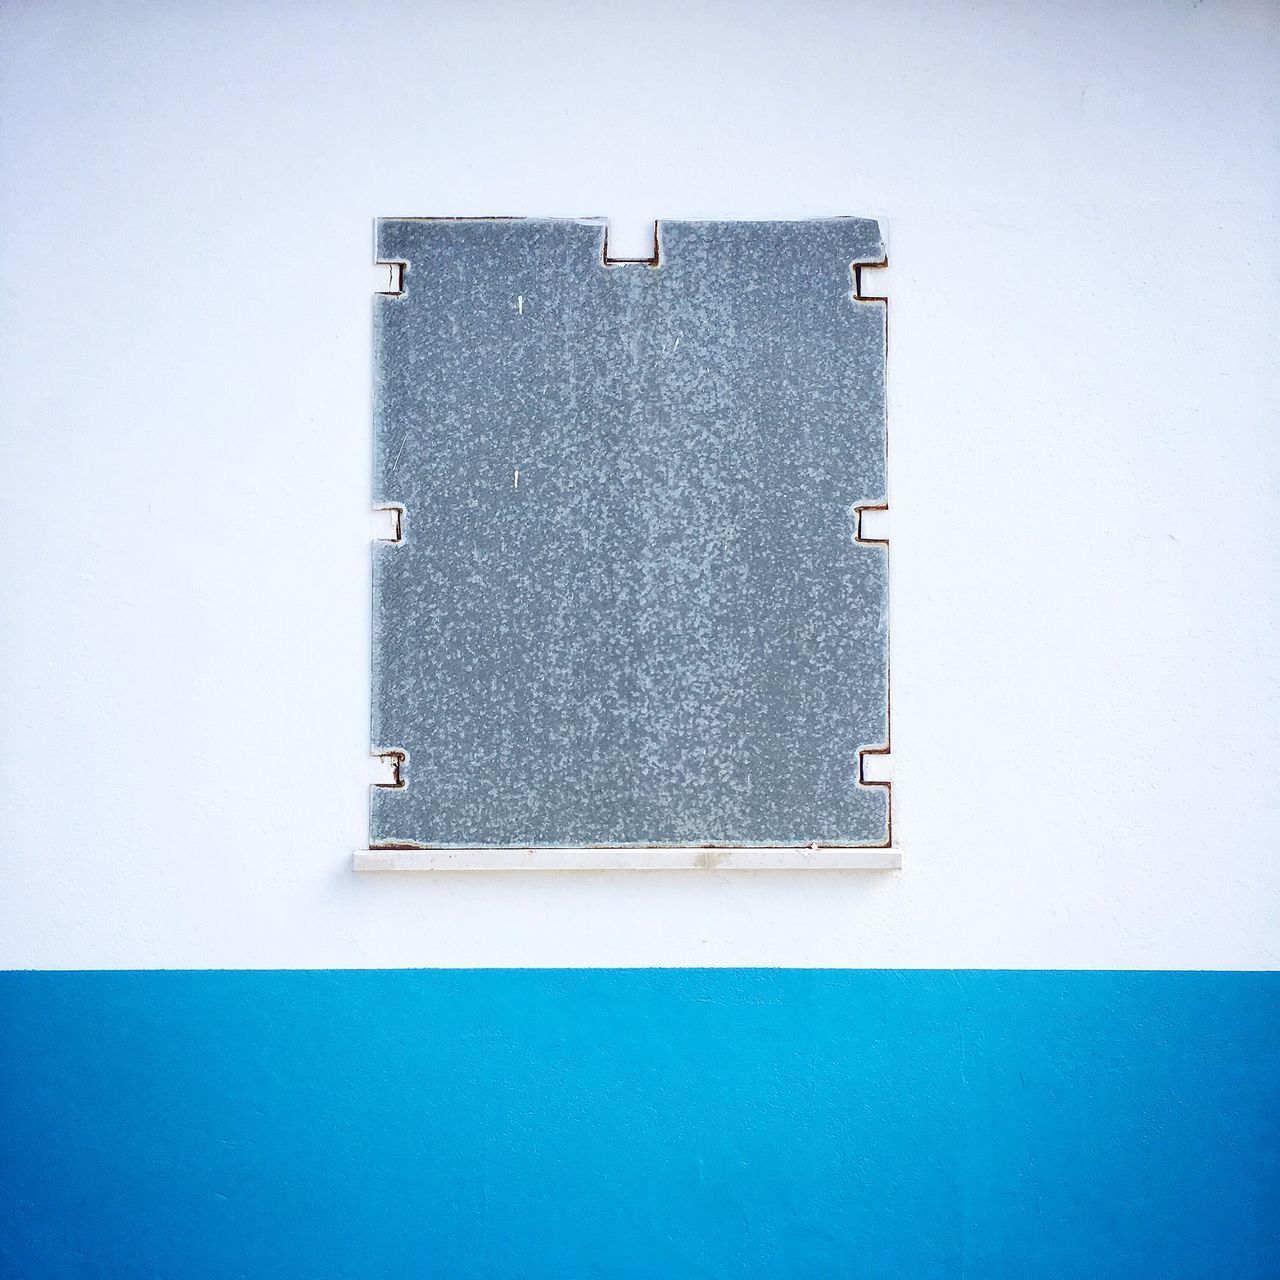 VIEW OF BLUE WALL AND WHITE BACKGROUND